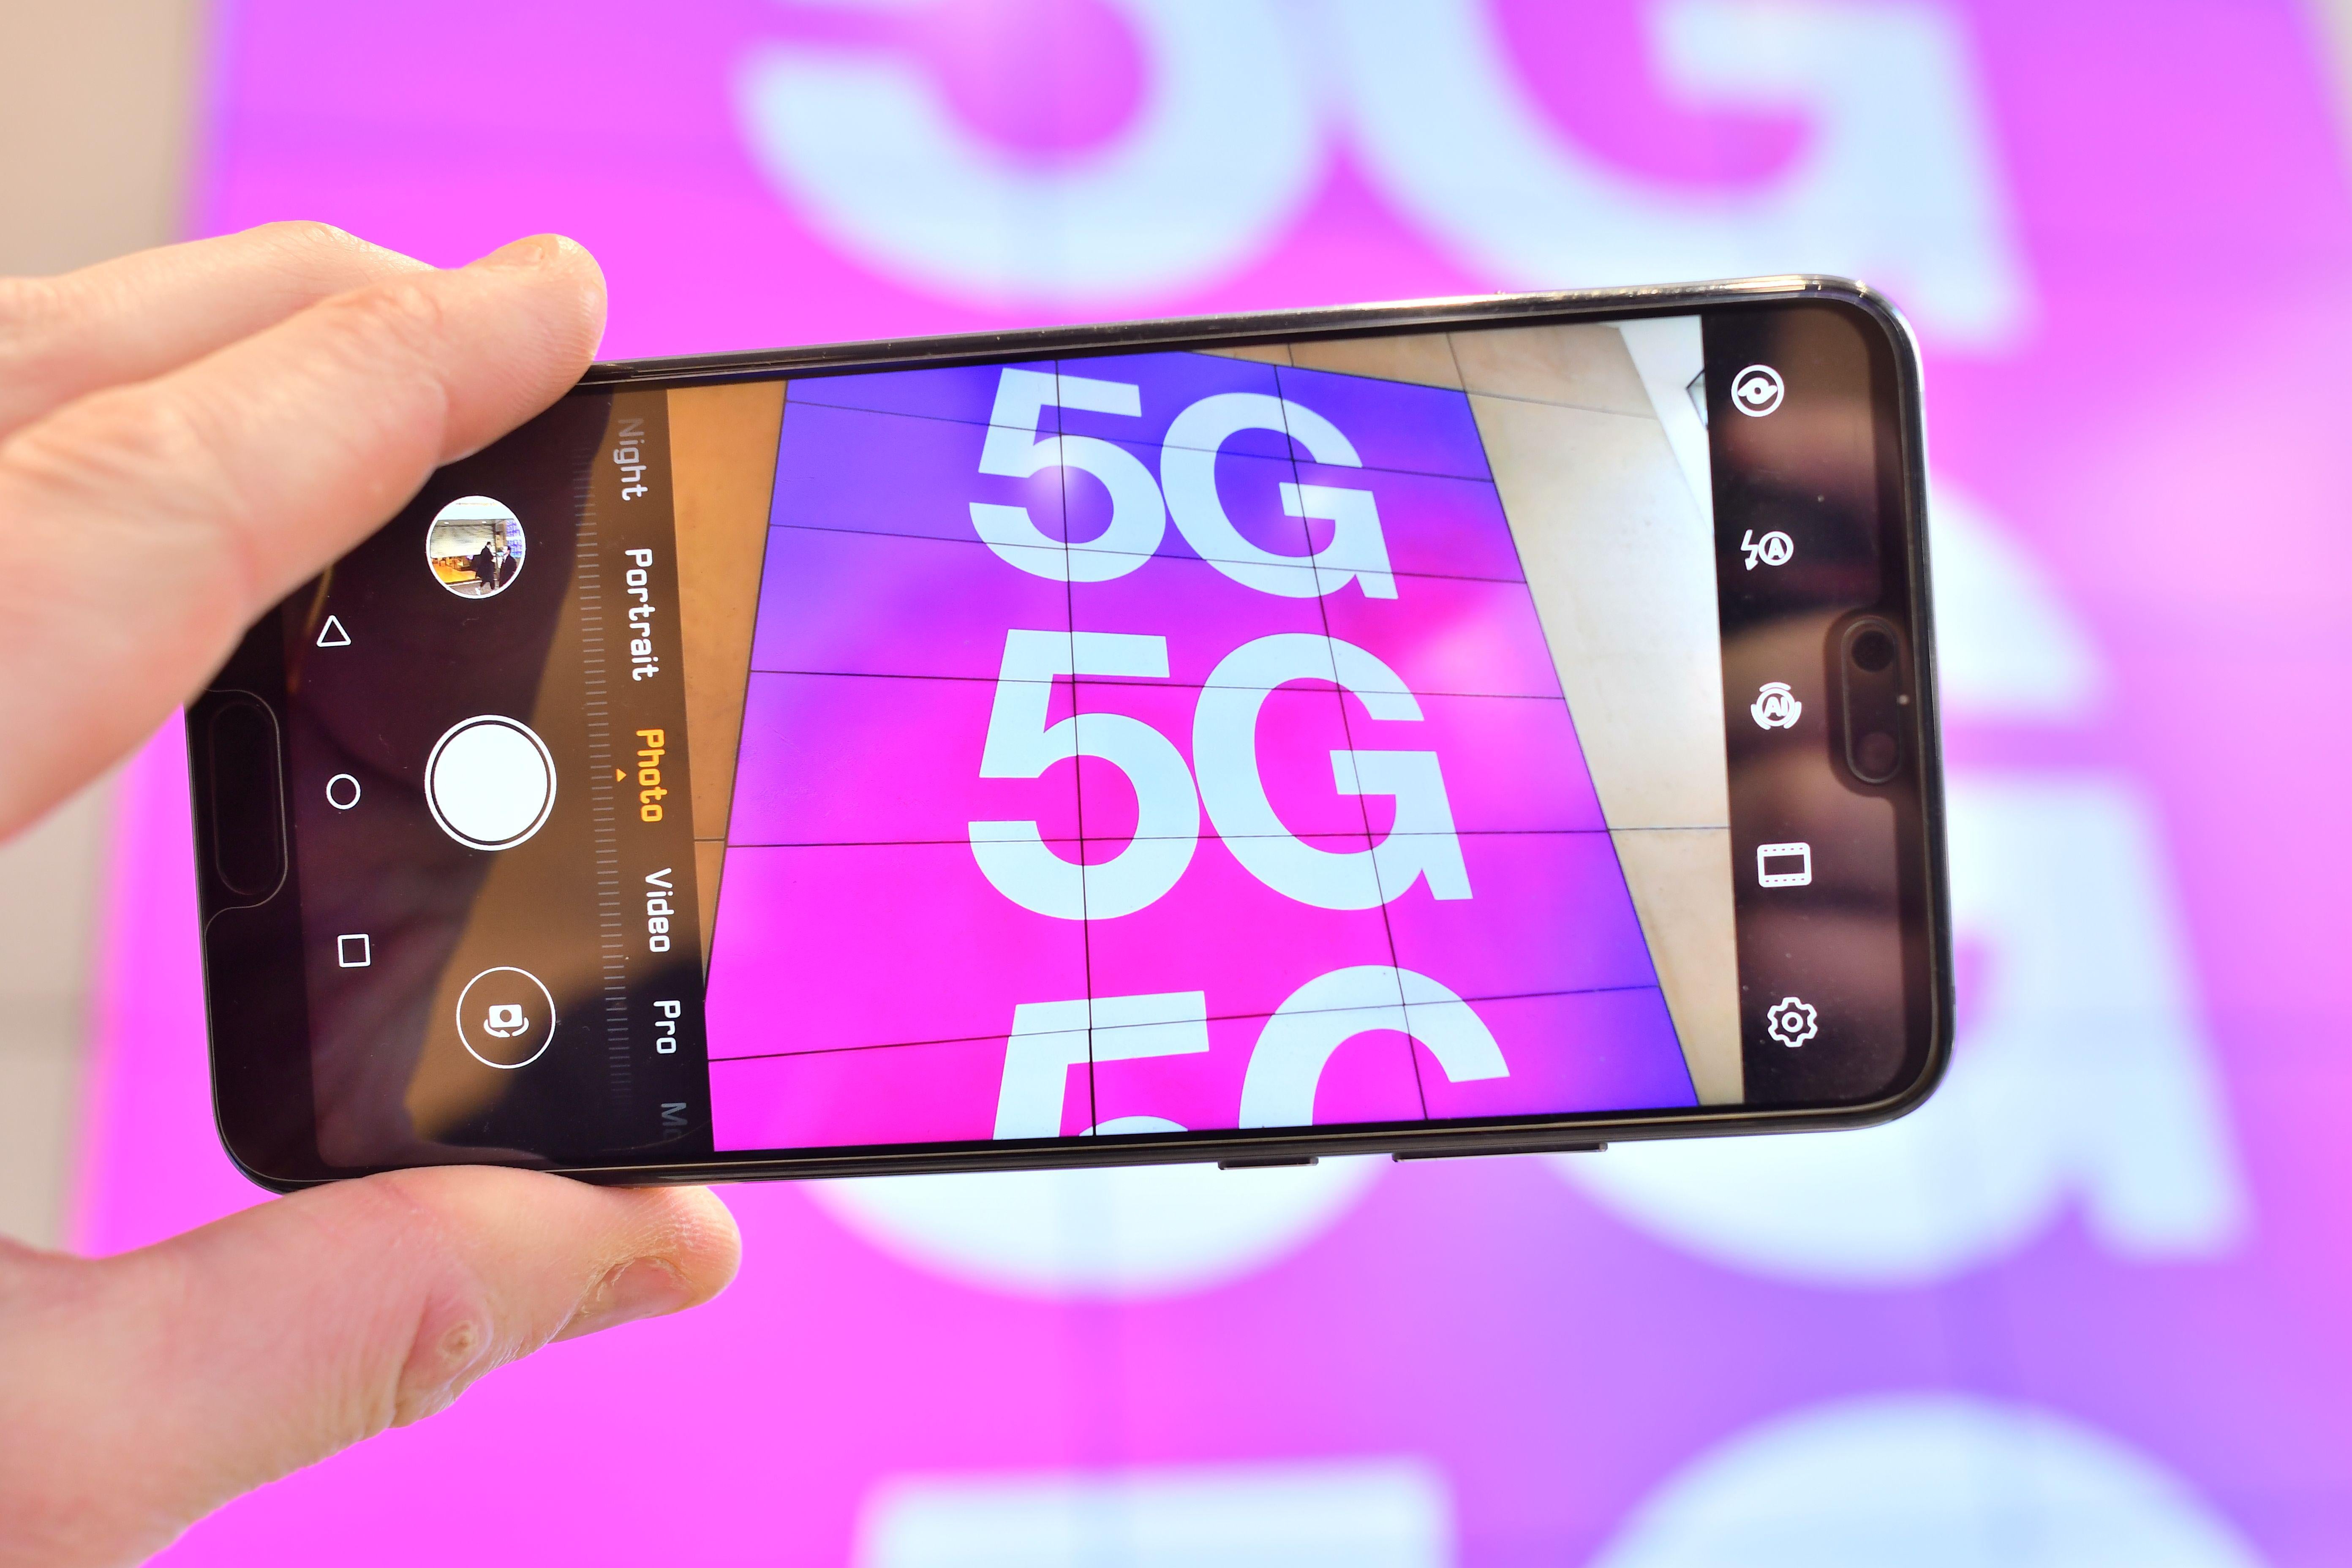 A phone being held up to photograph 5G signage.